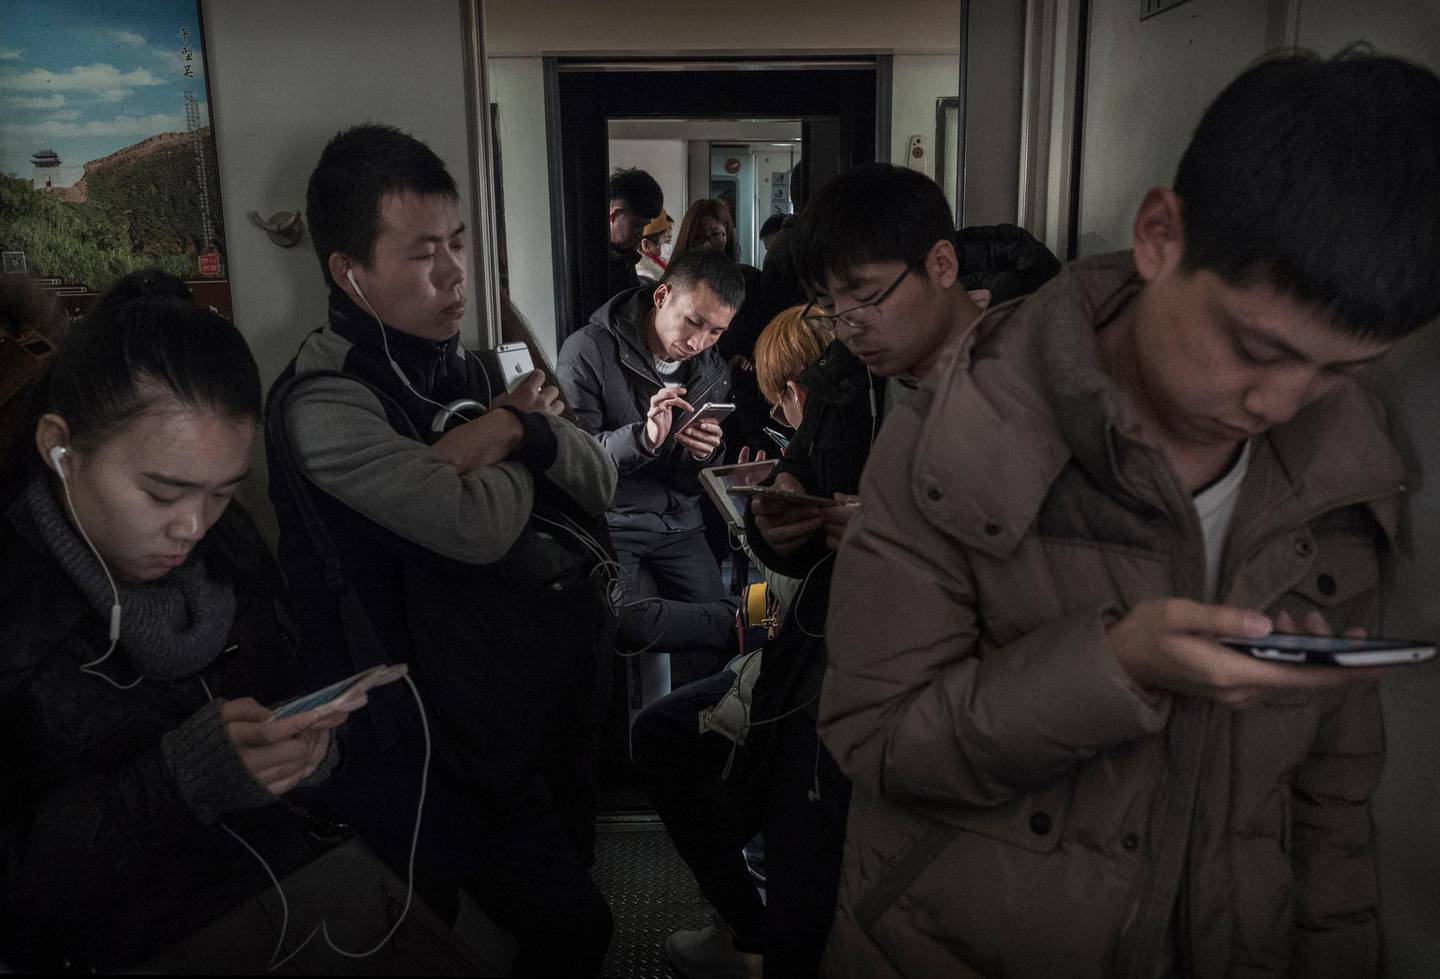 BEIJING, CHINA - JANUARY 25:  Chinese travelers ride in the "standing room" section of a crowded train between Beijing and Shijiazhuang, on January 25, 2017 in Hebei province, northern China. Millions of Chinese will travel home to visit families in what is often called the largest human migration during the Spring Festival holiday period that begins with the Lunar New Year on January 28, 2017.  (Photo by Kevin Frayer/Getty Images)